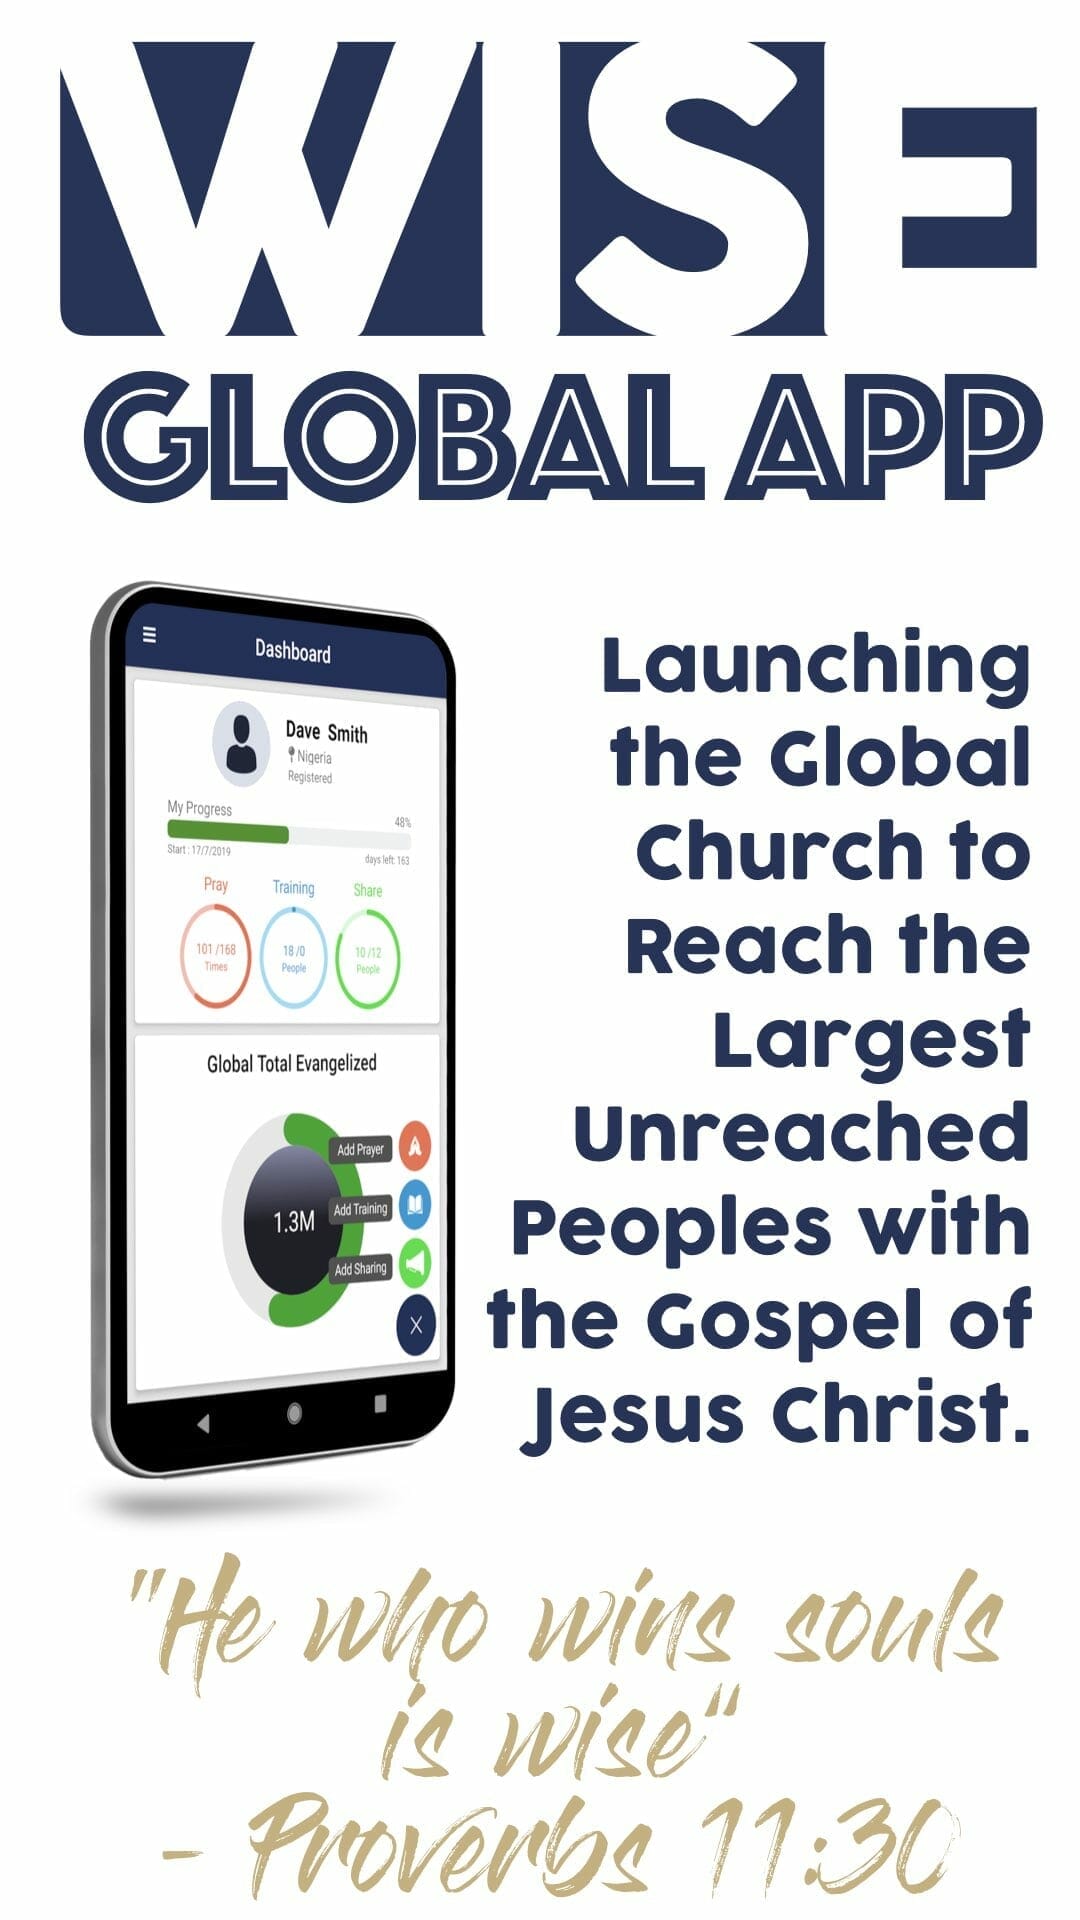 WISE GLOBAL APP Launching the Global Church to Reach the Largest Unreached Peoples with the Gospel of Jesus Christ. "He who wing souls is wise" - Proverbs 11:30